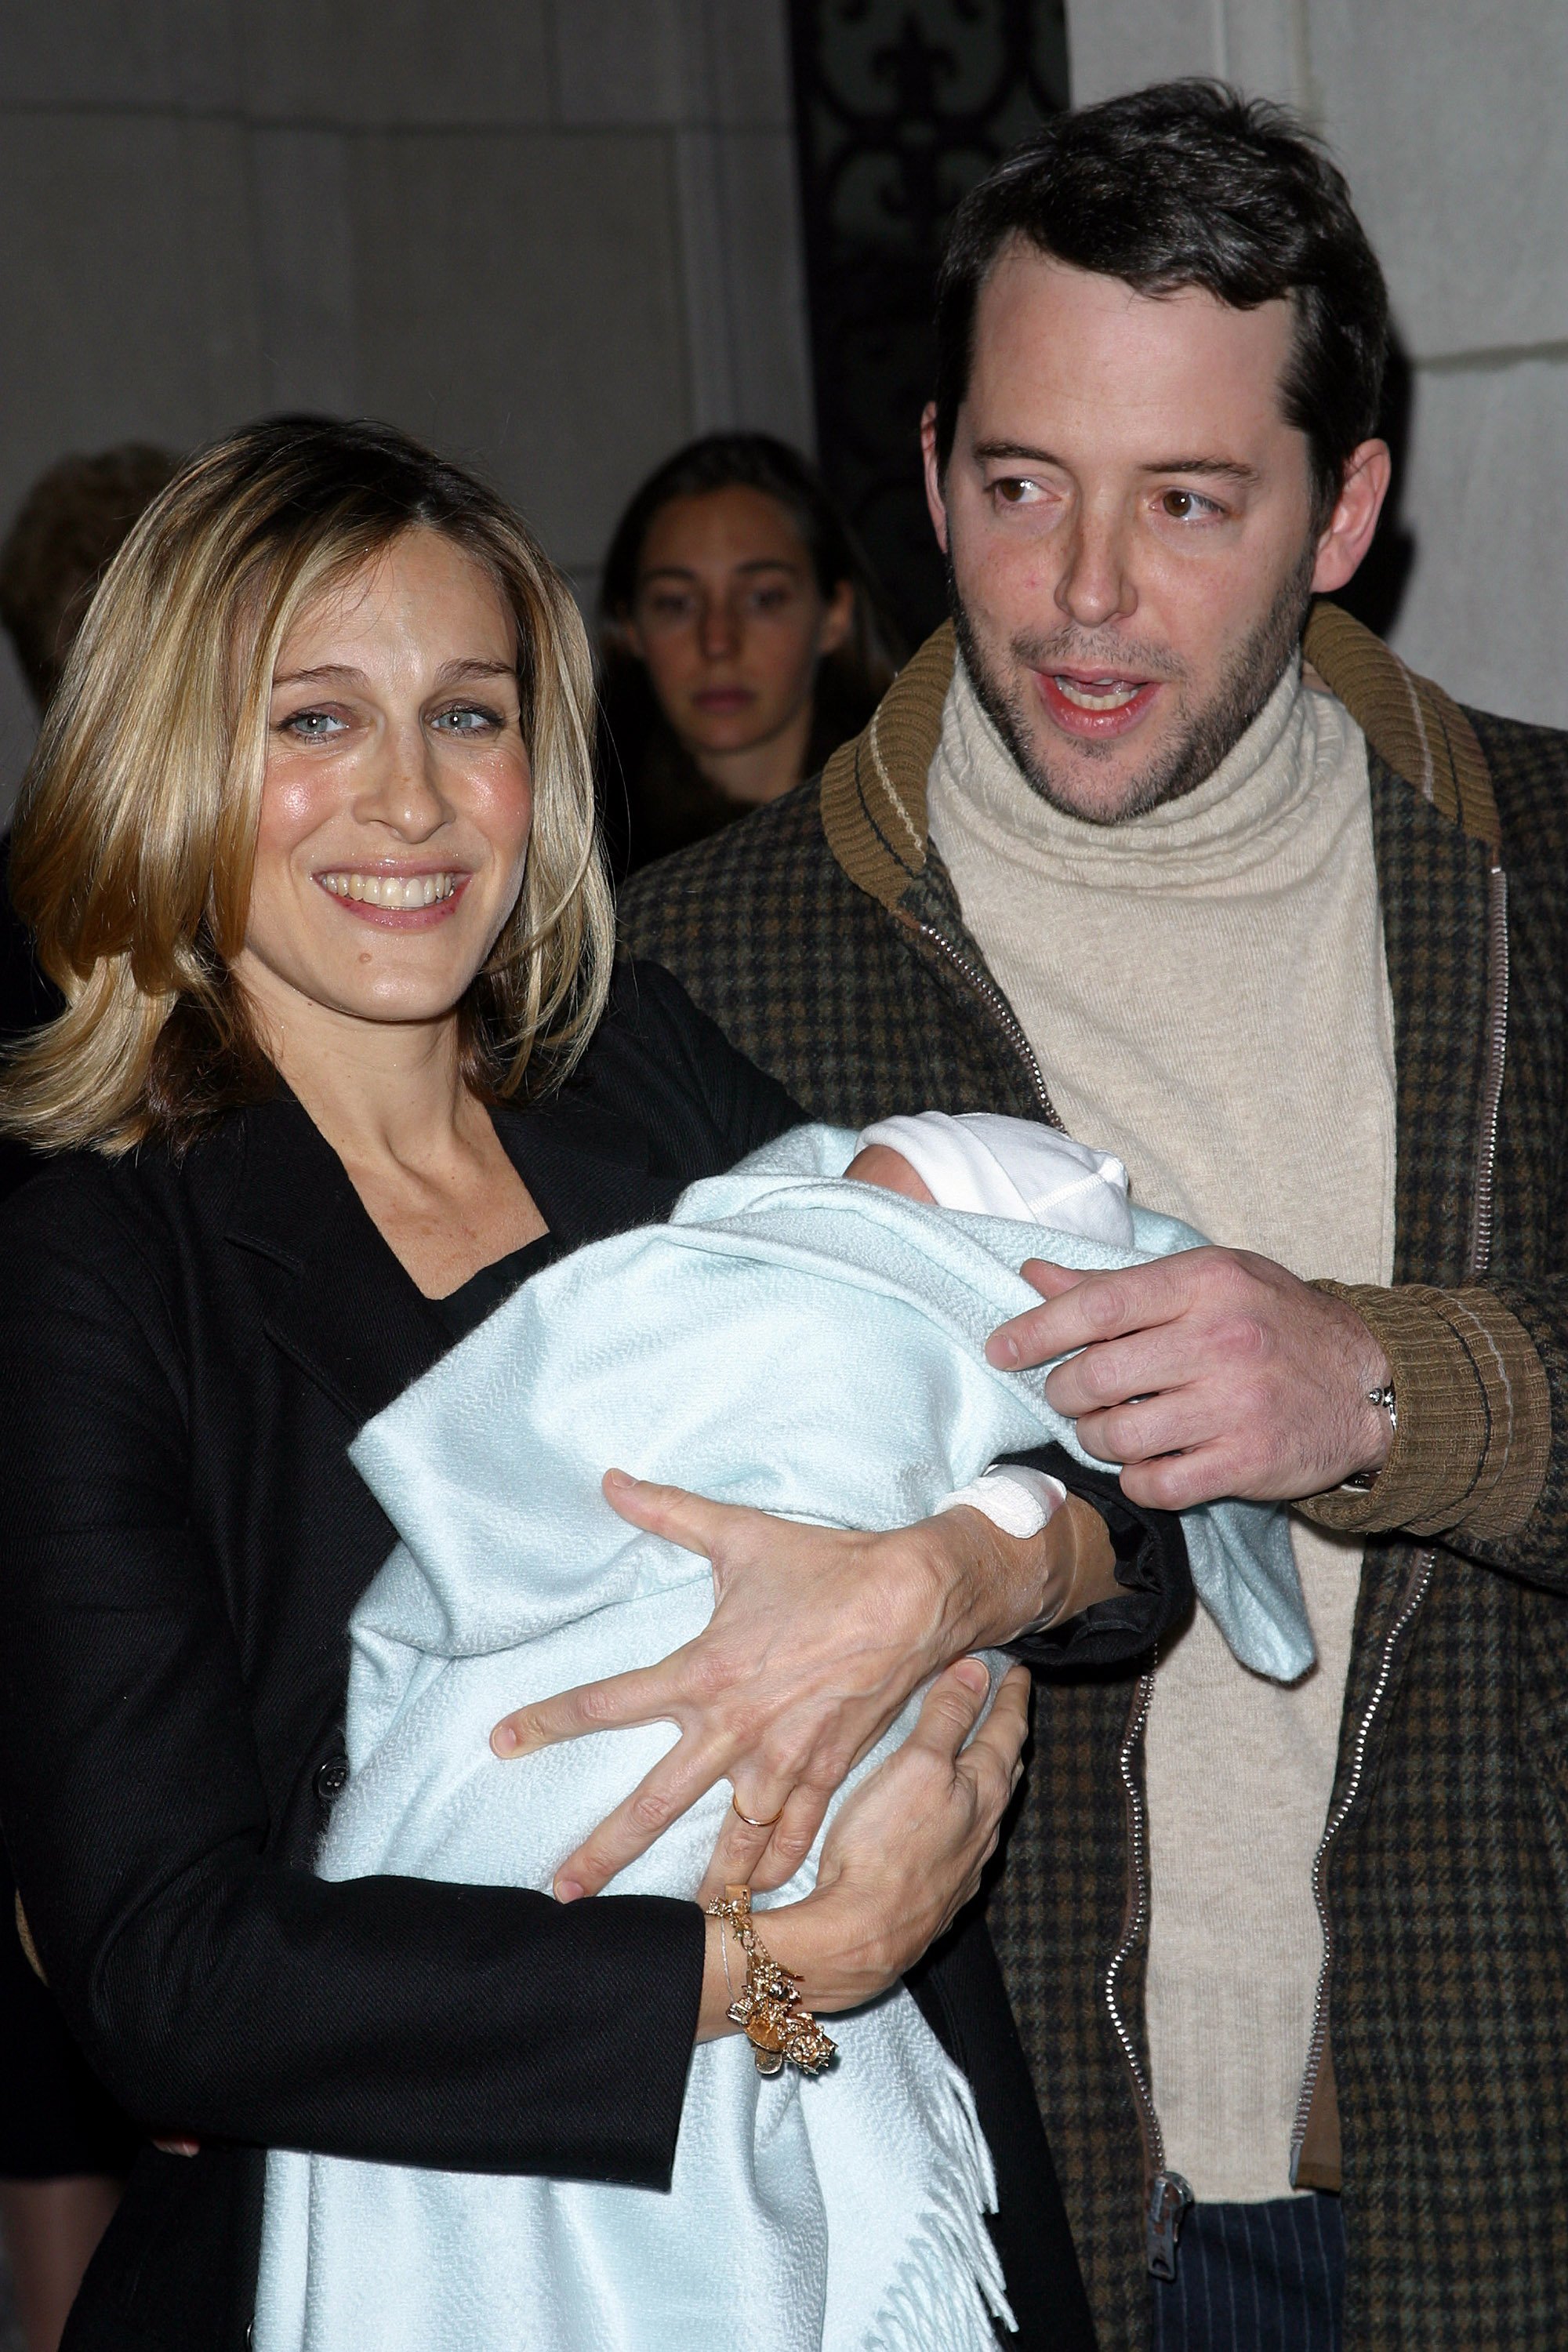 Sarah Jessica Parker, Matthew Broderick, and their baby James Wilkie Broderick | Source: Getty Images